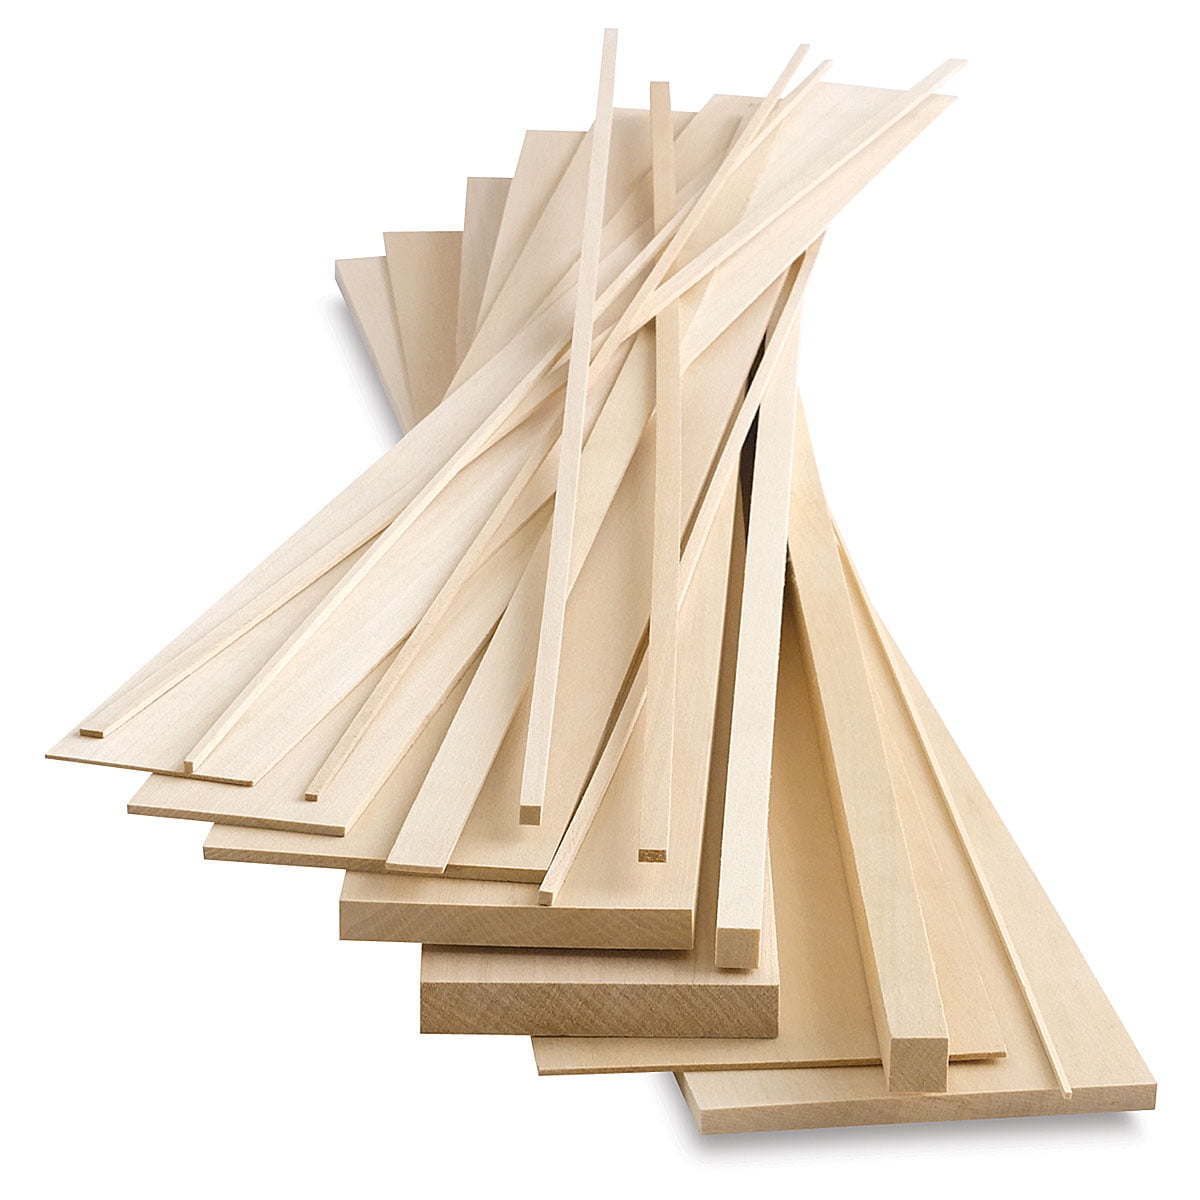 Midwest Products 4002 1/16 x 3 x 36 Basswood Sheet